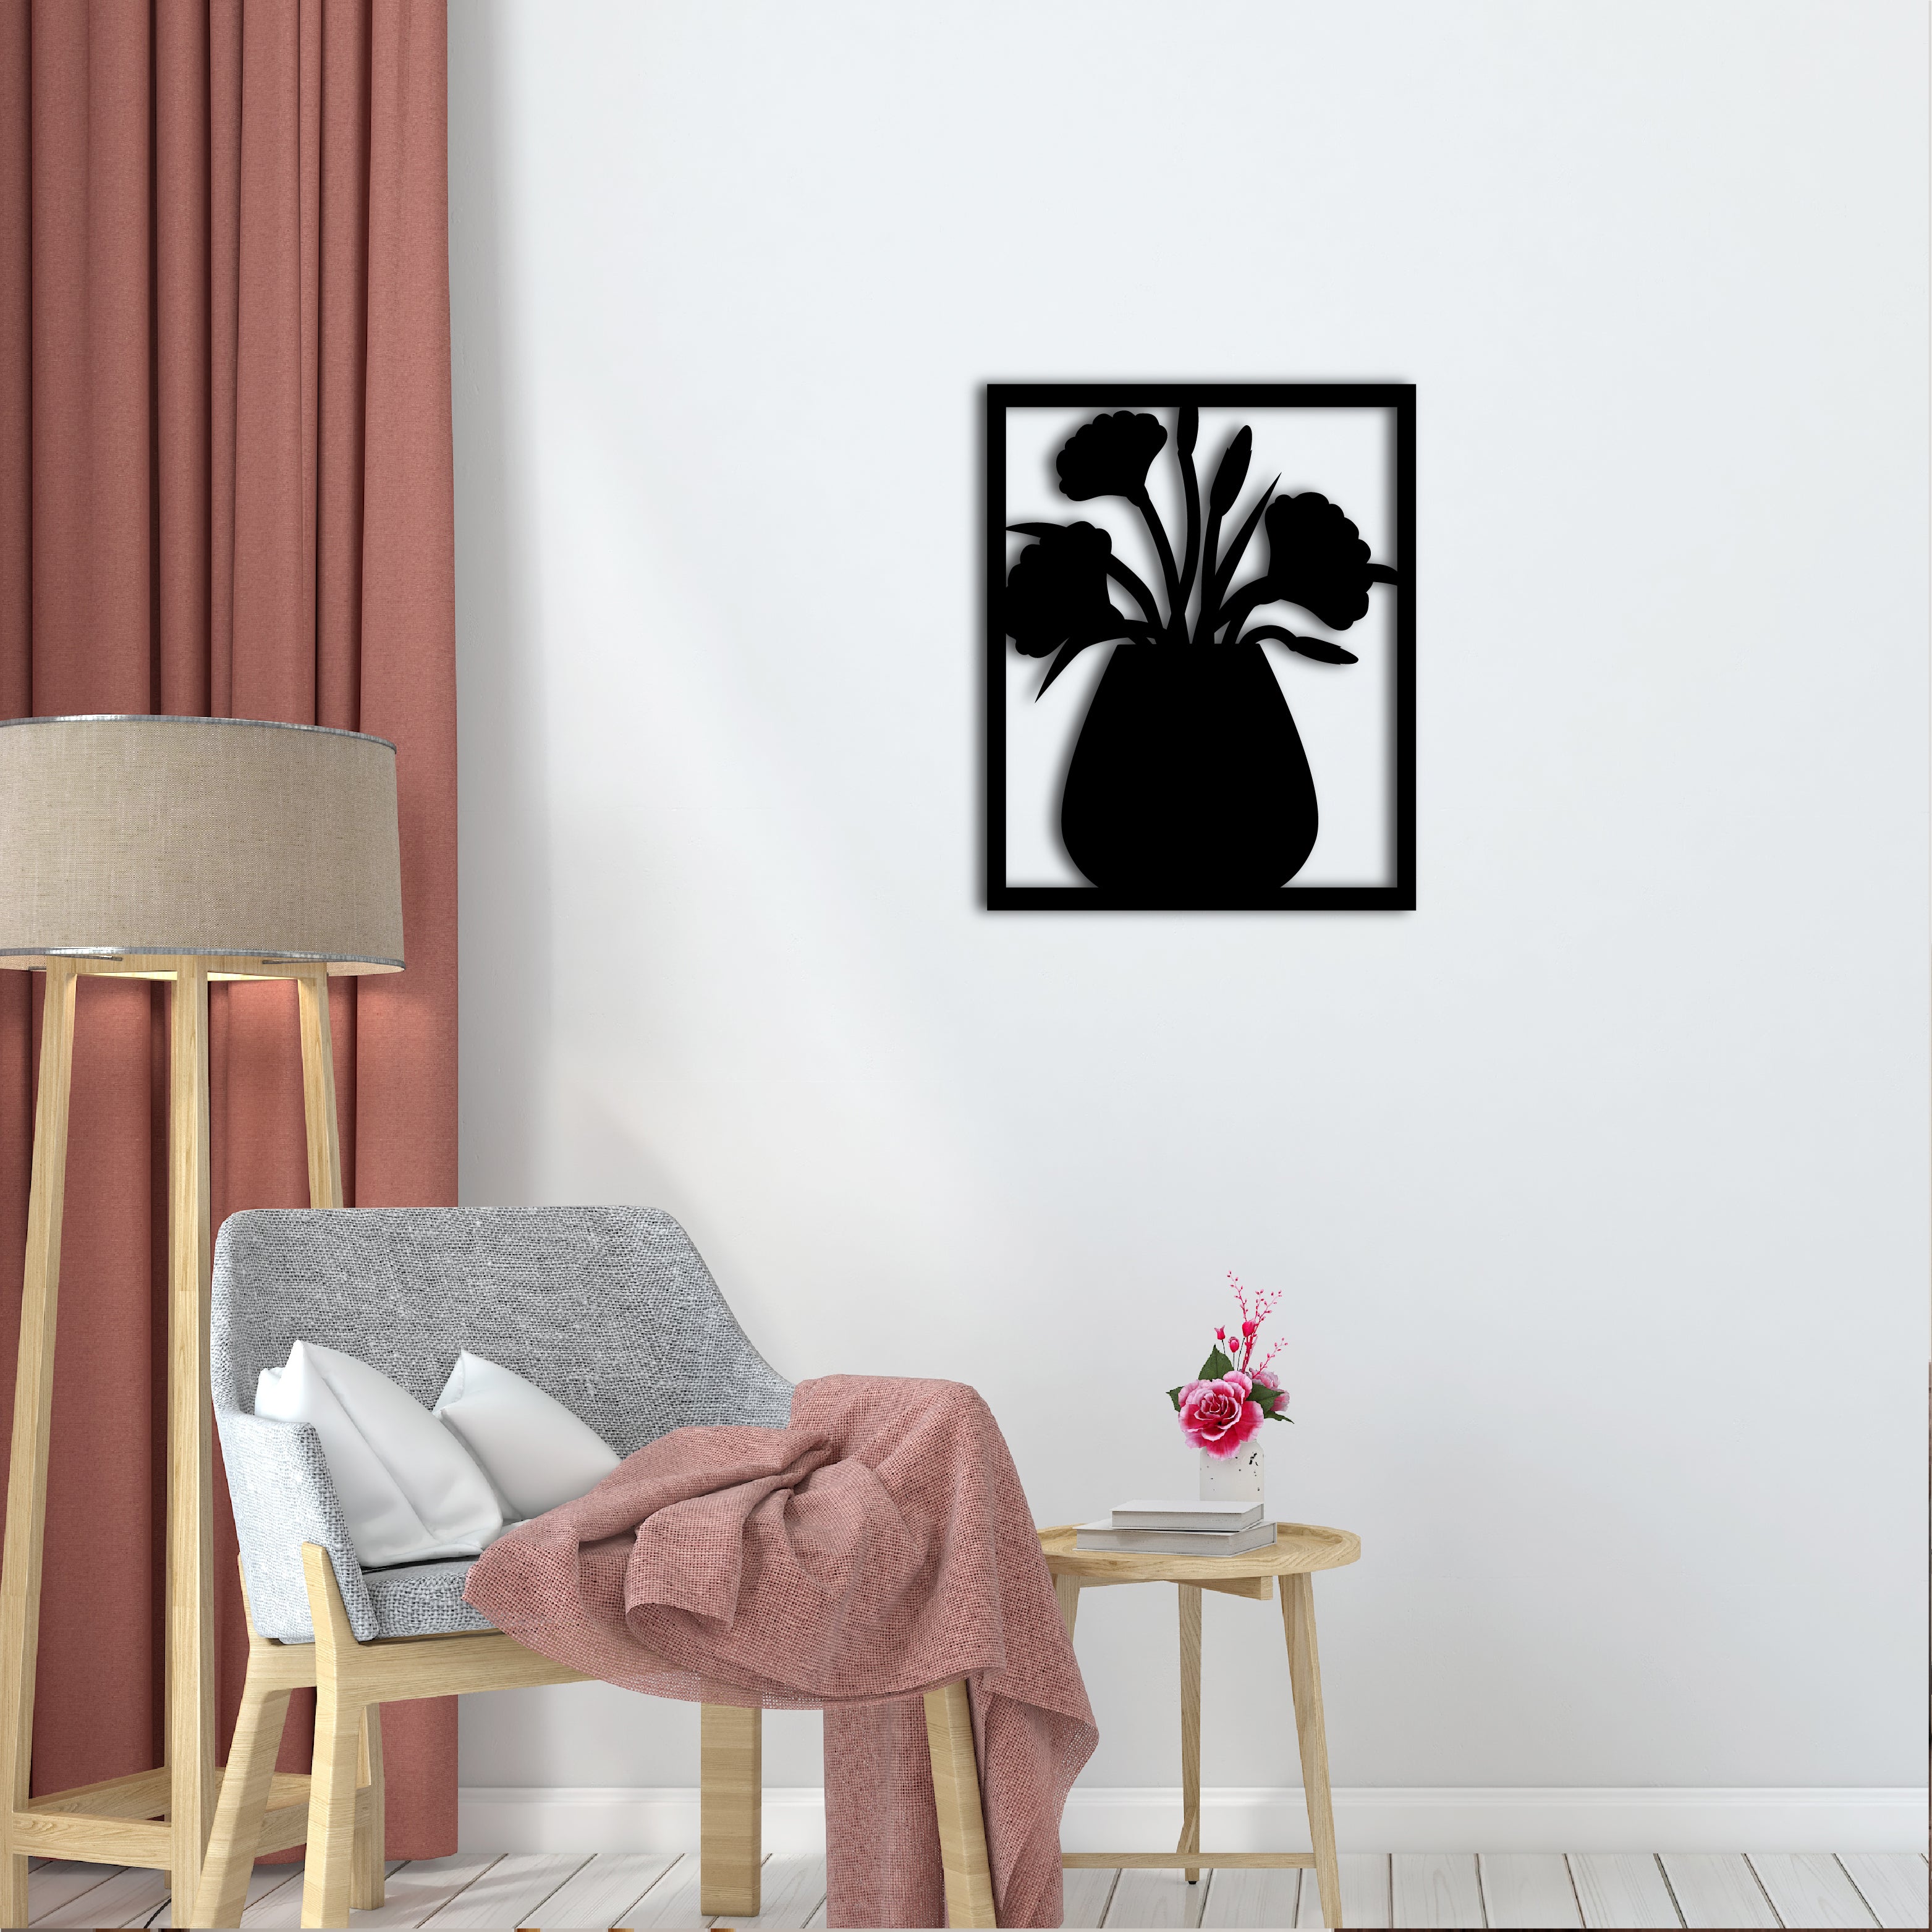 Flower Vase Frame Black Engineered Wood Wall Art Cutout, Ready To Hang Home Decor 1